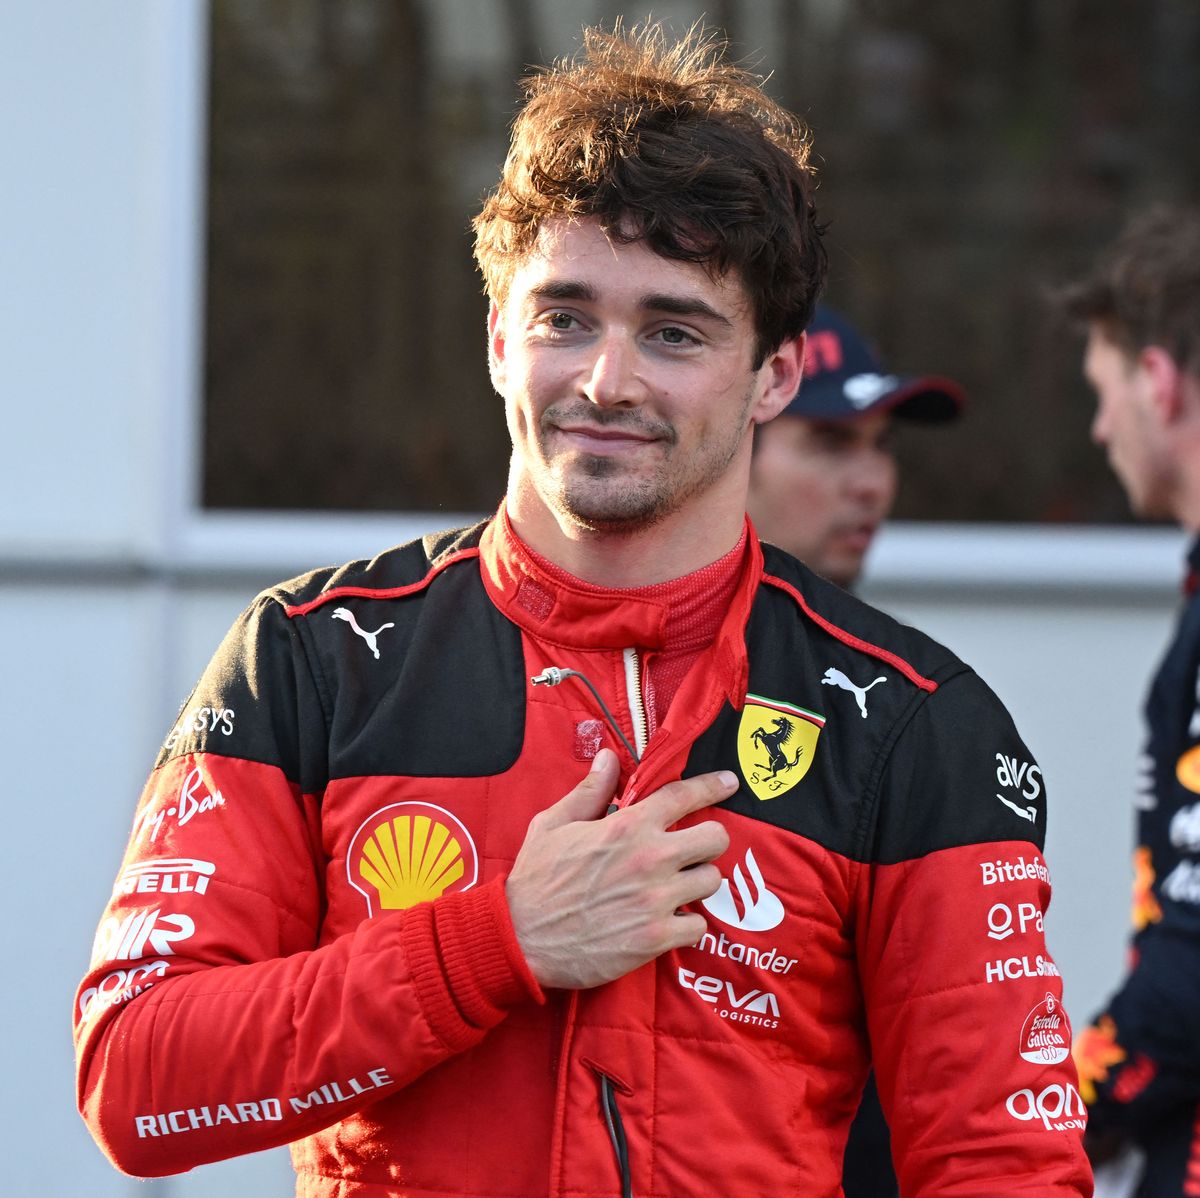 https://hips.hearstapps.com/hmg-prod/images/ferraris-monegasque-driver-charles-leclerc-reacts-after-news-photo-1706190895.jpg?crop=0.668xw:1.00xh;0.167xw,0&resize=1200:*